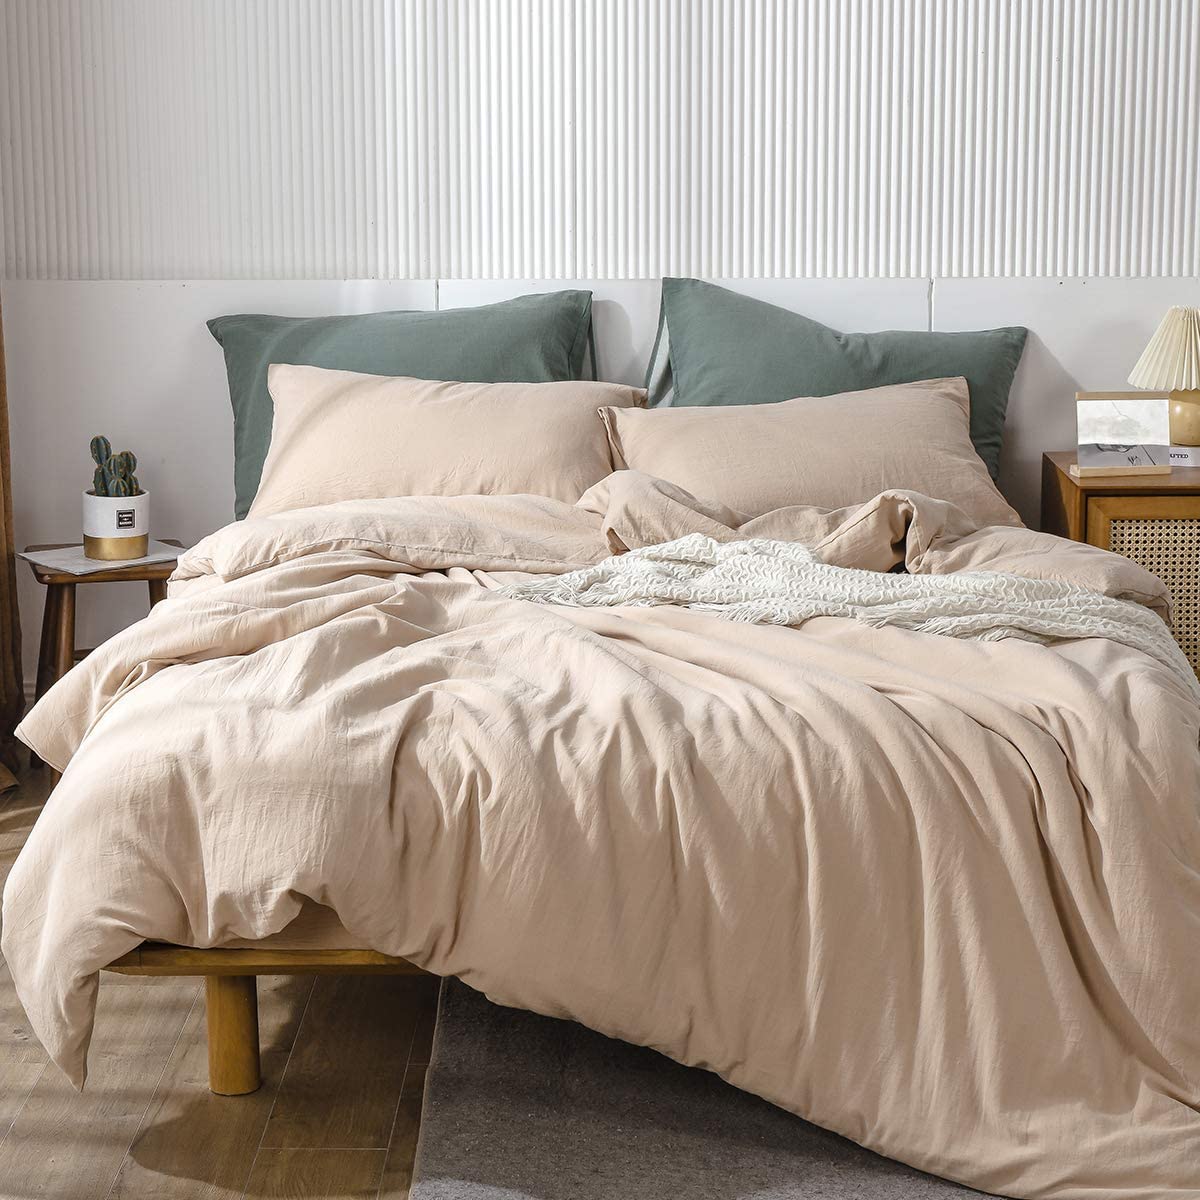 Price:$89.99  Pre-Washed Cotton Duvet Cover Set Super Soft Breathable Durable - Perfectly Casual Linen Look but Luxurious Feel (Heathered Beige, Queen) : Home & Kitchen